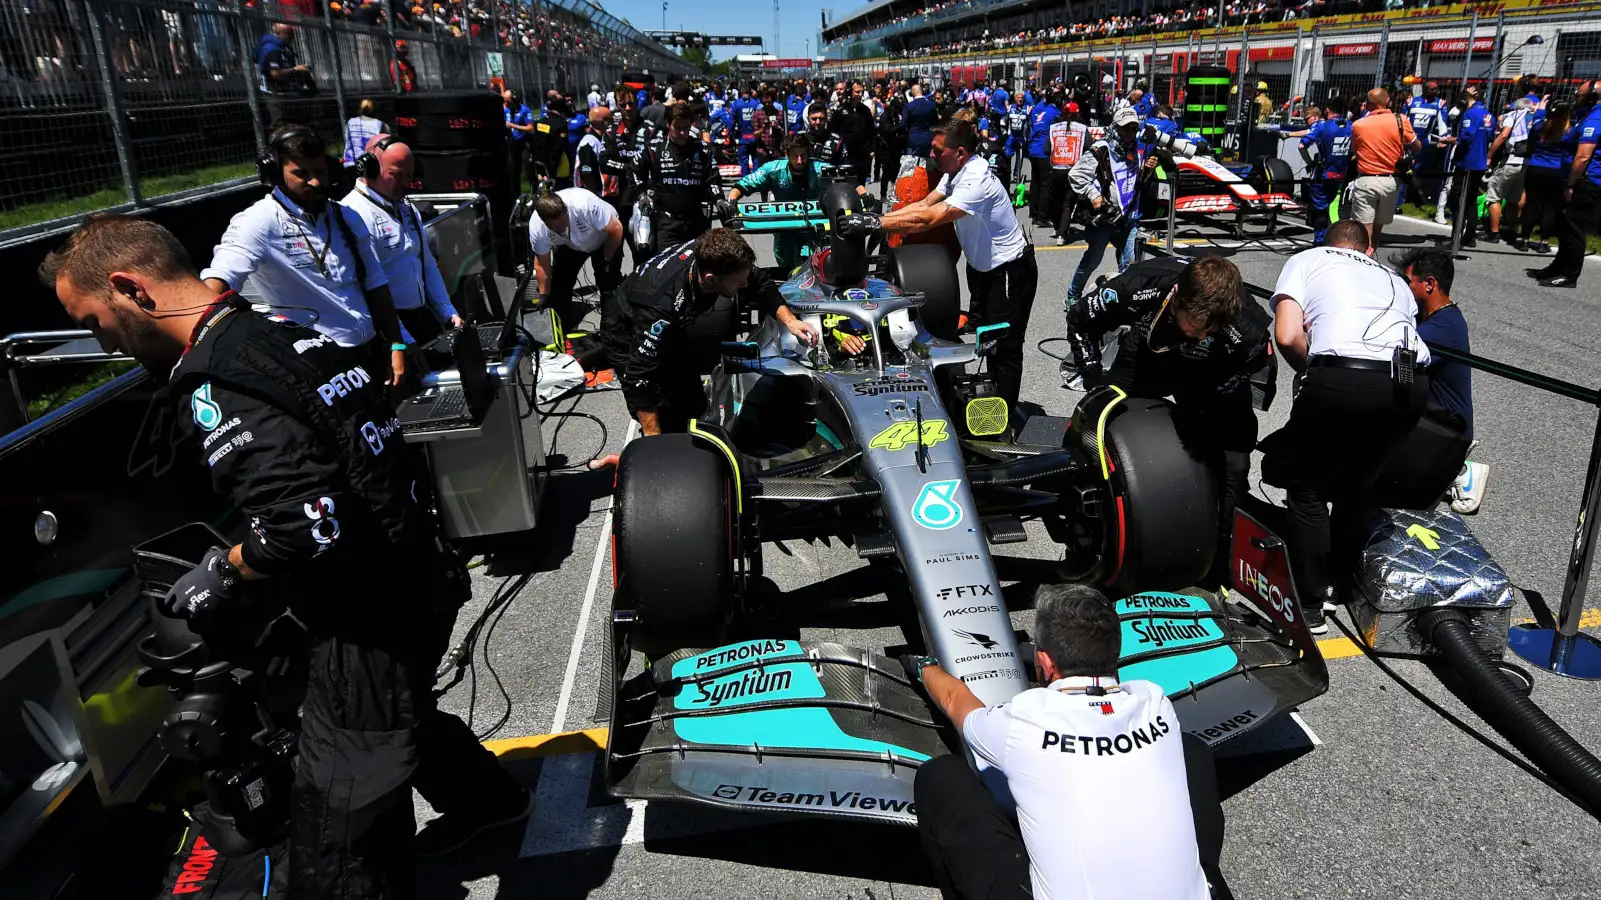 Lewis Hamilton sits in his car on the grid, mechanics present. Montreal June 2022